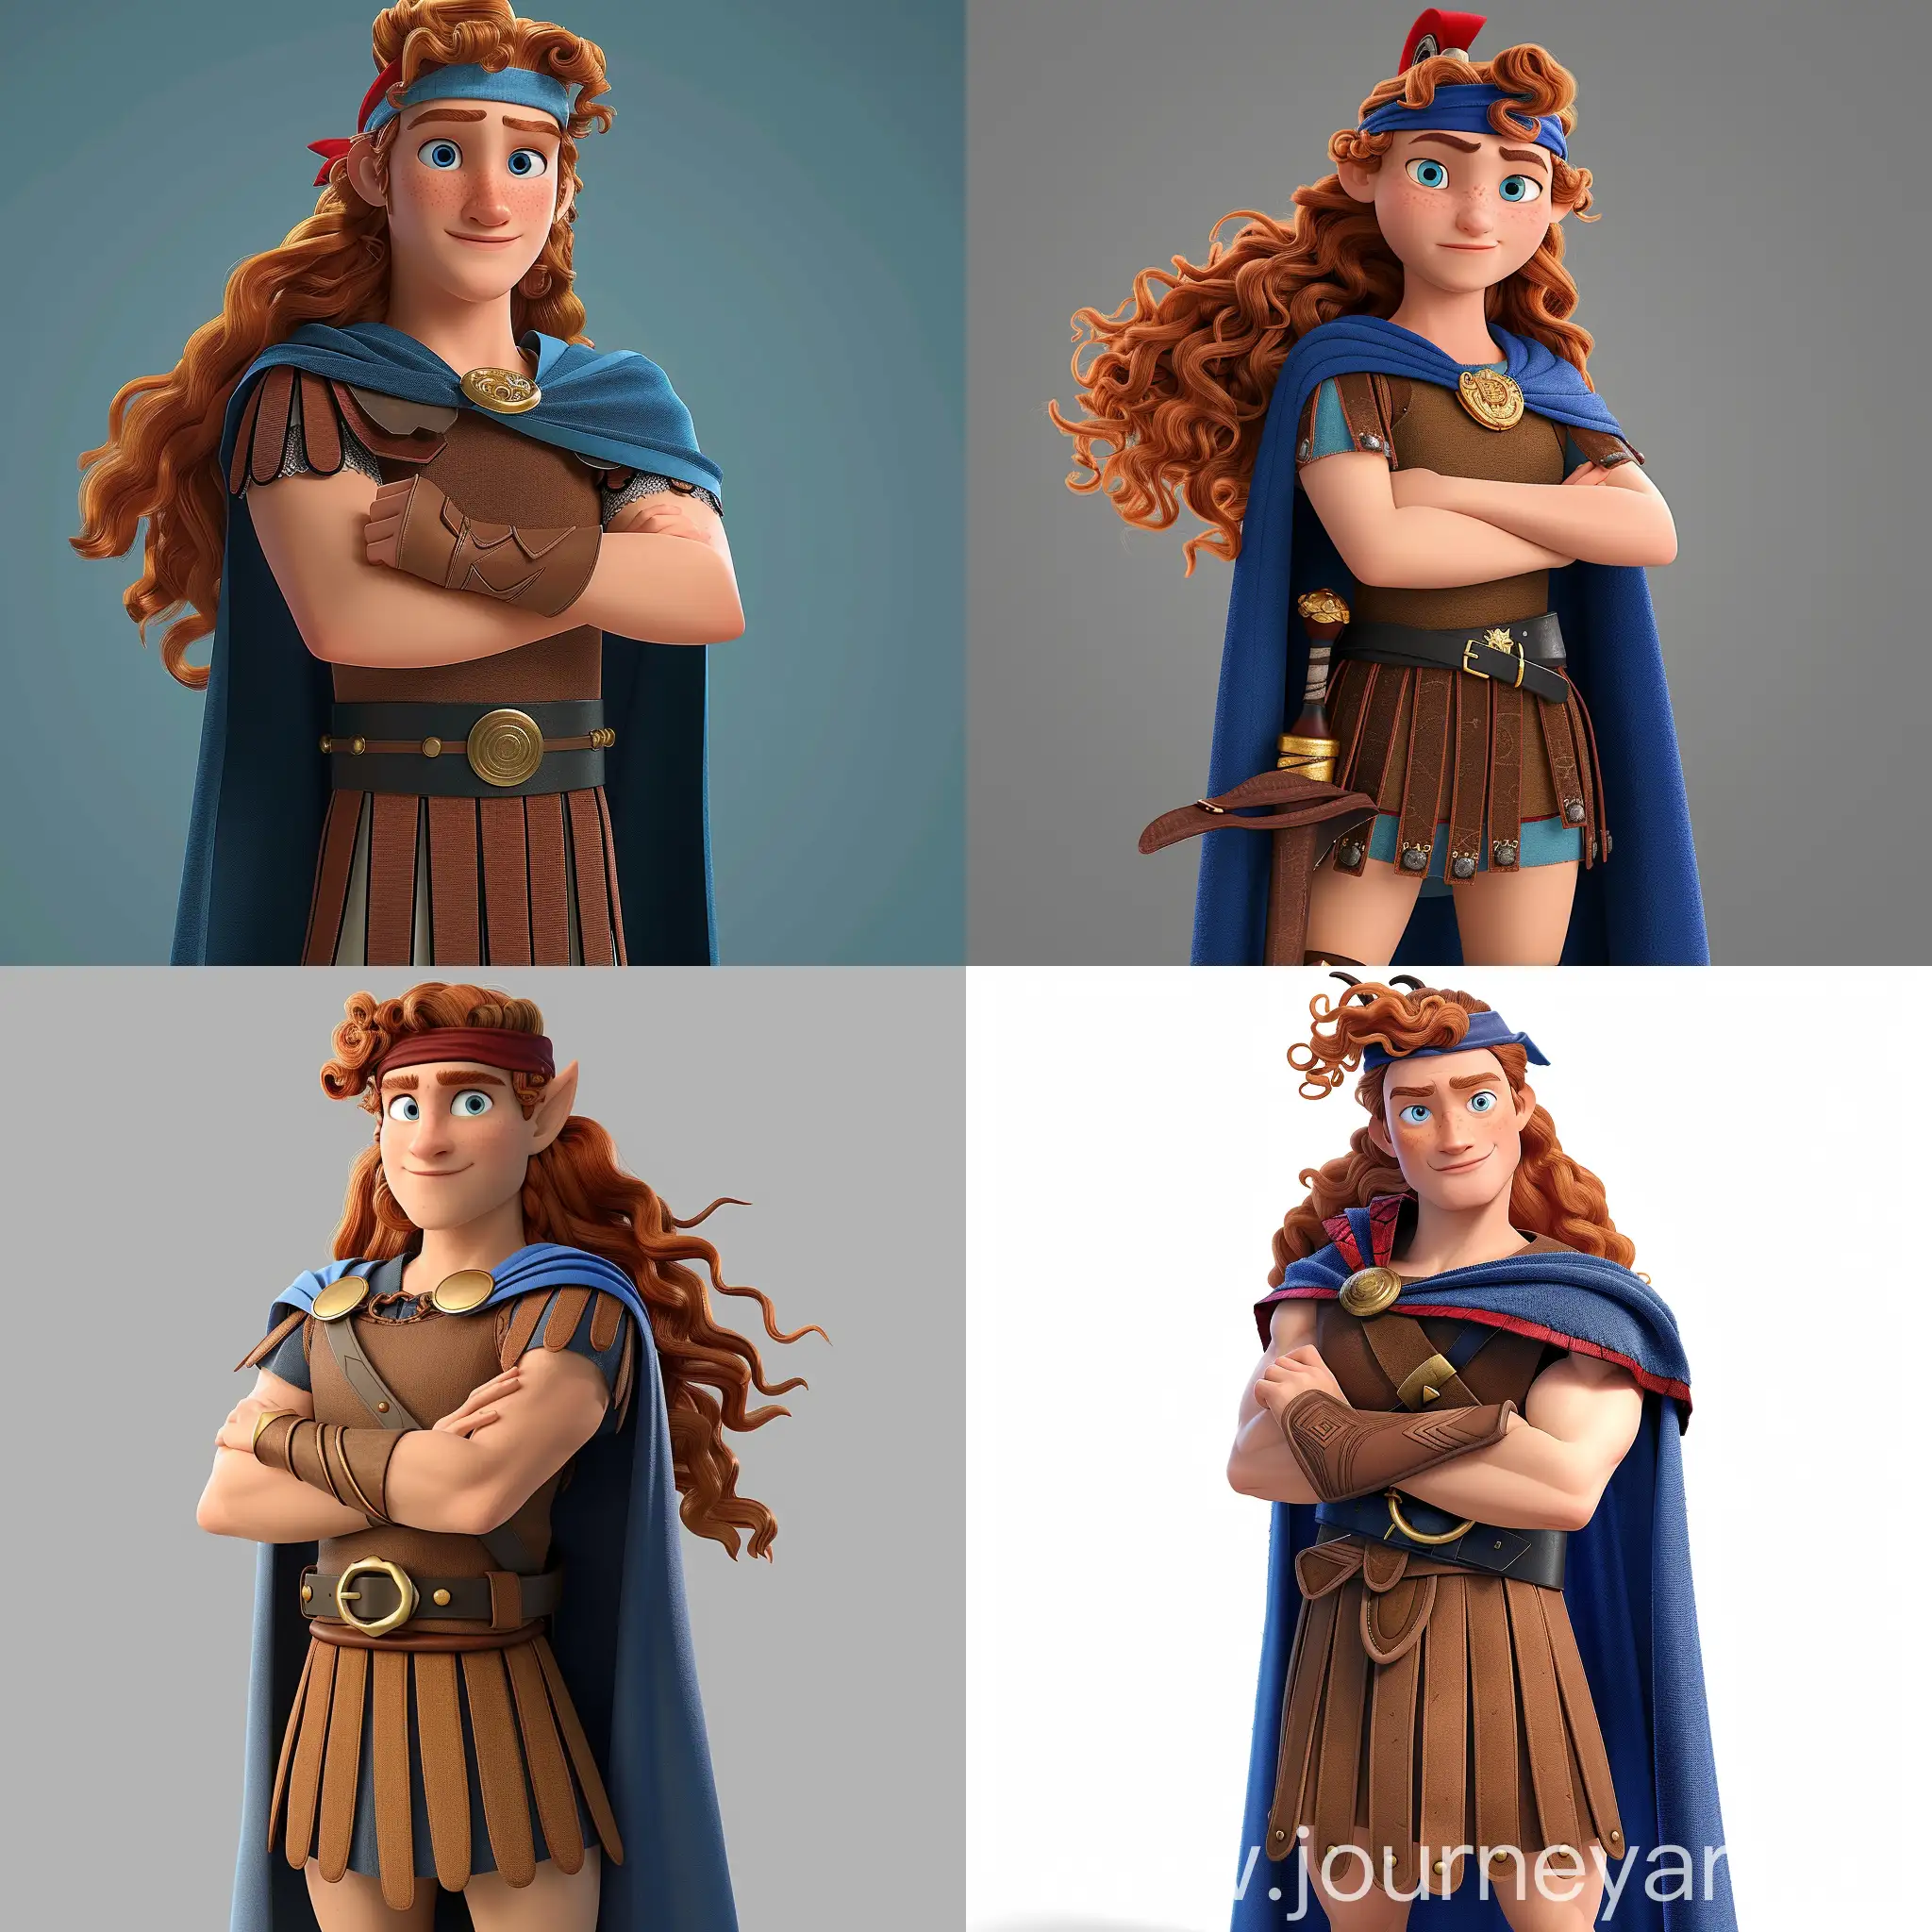 Scene from Pixar cartoon movie A young muscular and athletic man, long wavy red hair down to the shoulders with a curly topknot, light blue eyes, confident expression, wearing a short brown Greek tunic, black belt with a golden buckle, brown leather bracers, brown leather sandals up to the calf, blue cape fastened at the shoulders, red headband across the forehead, standing with arms crossed over his chest, smooth and well-defined facial features. Scene from Pixar cartoon